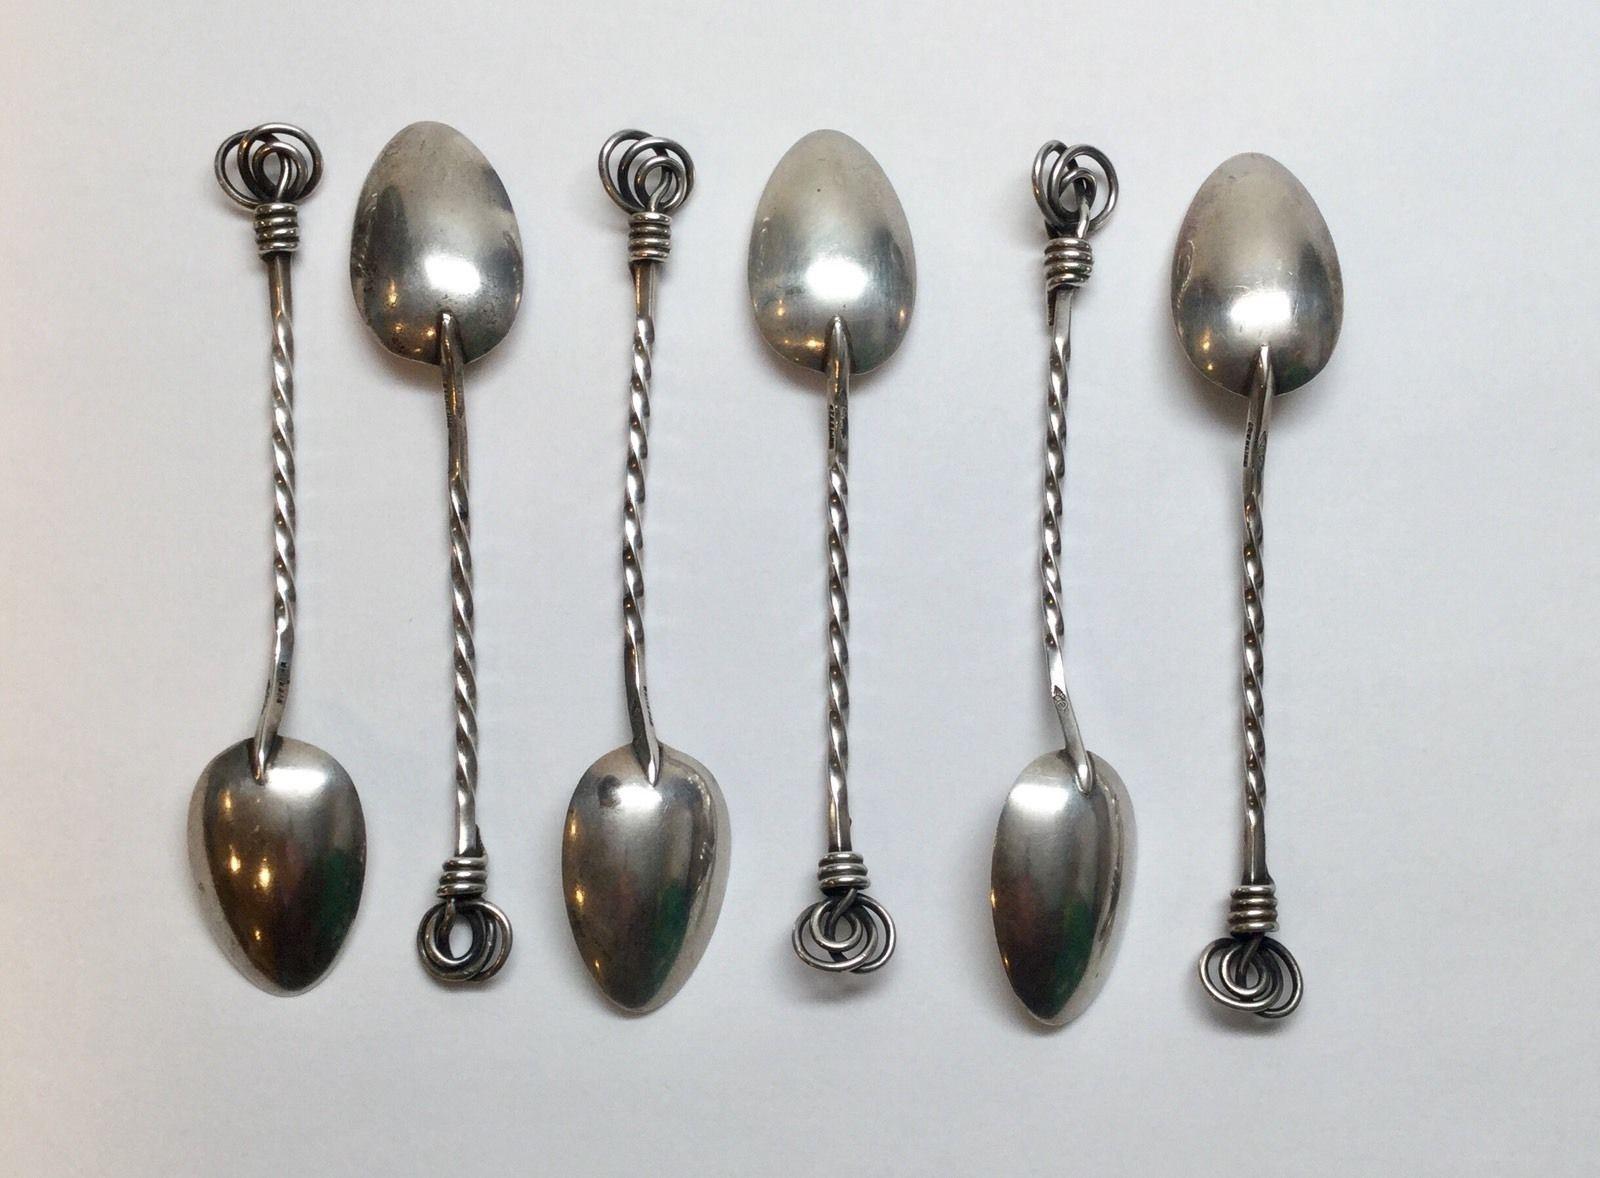 6 antique George W. Shiebler sterling silver twisted coil handle demitasse spoons, circa 1880 NYC. Marked: S in winged circle, Sterling. Measures: 4 1/2